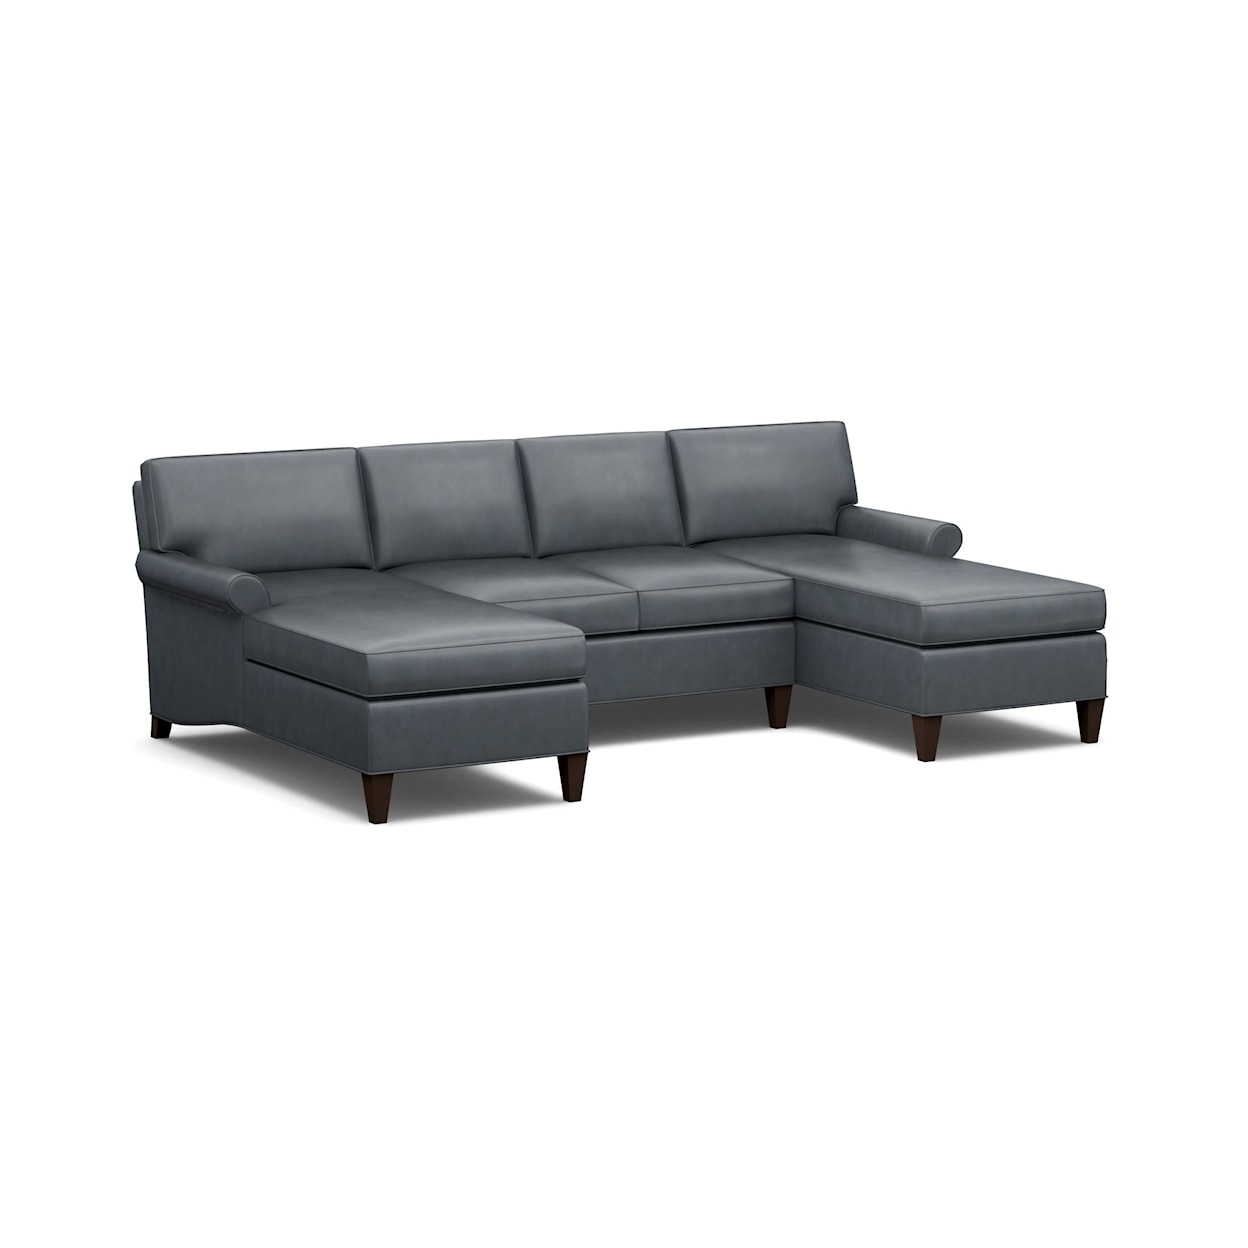 Century Essex 3-Piece Sectional Chaise Sofa